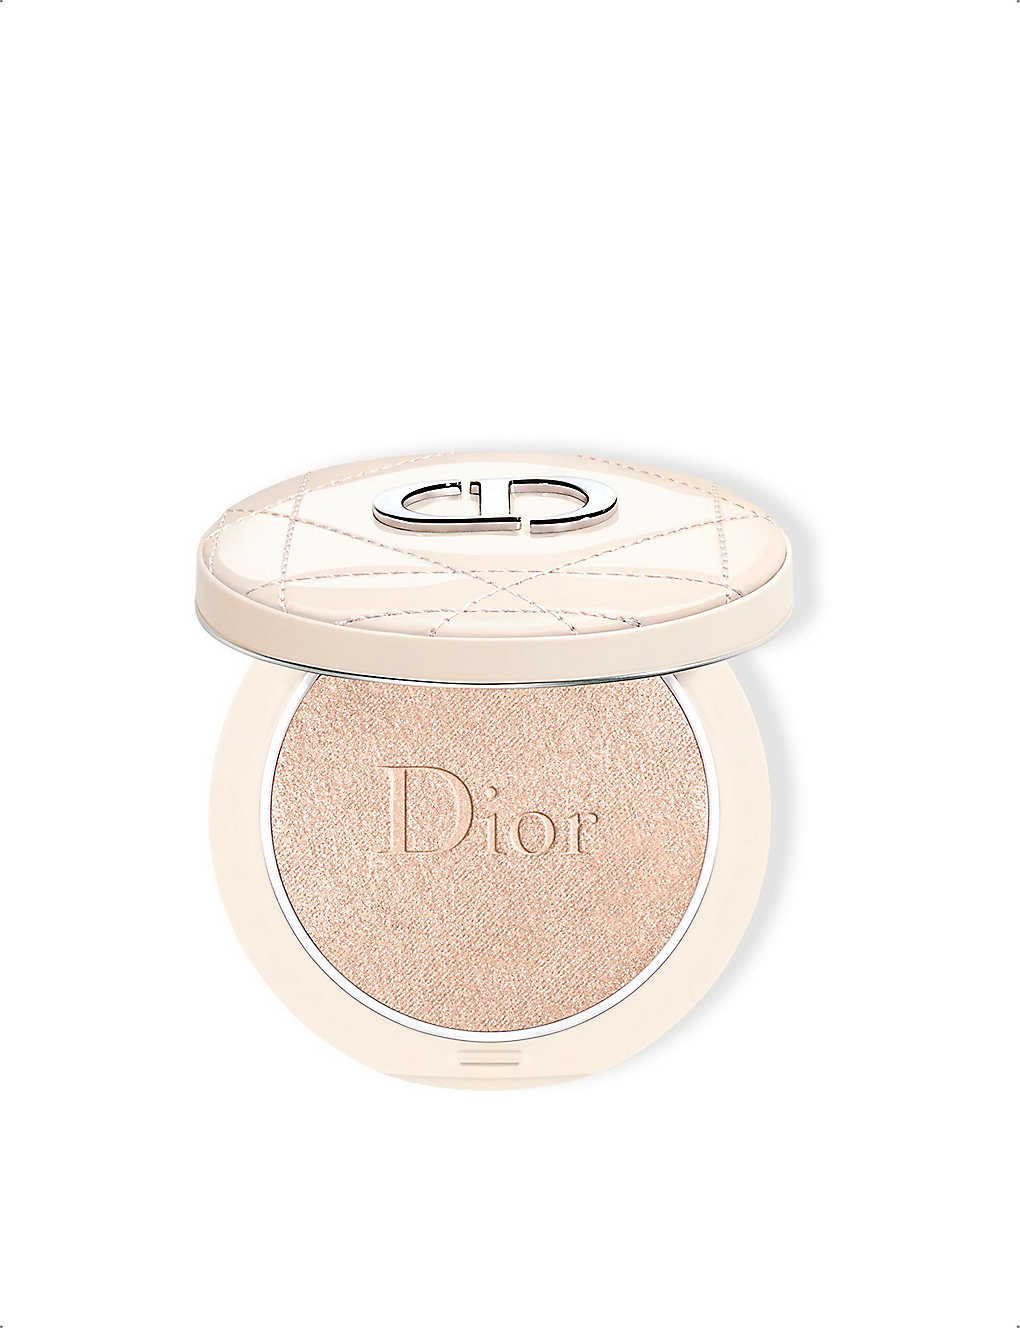 Dior Forever Couture Luminizer Longwear Highlighting Powder 6g In 001